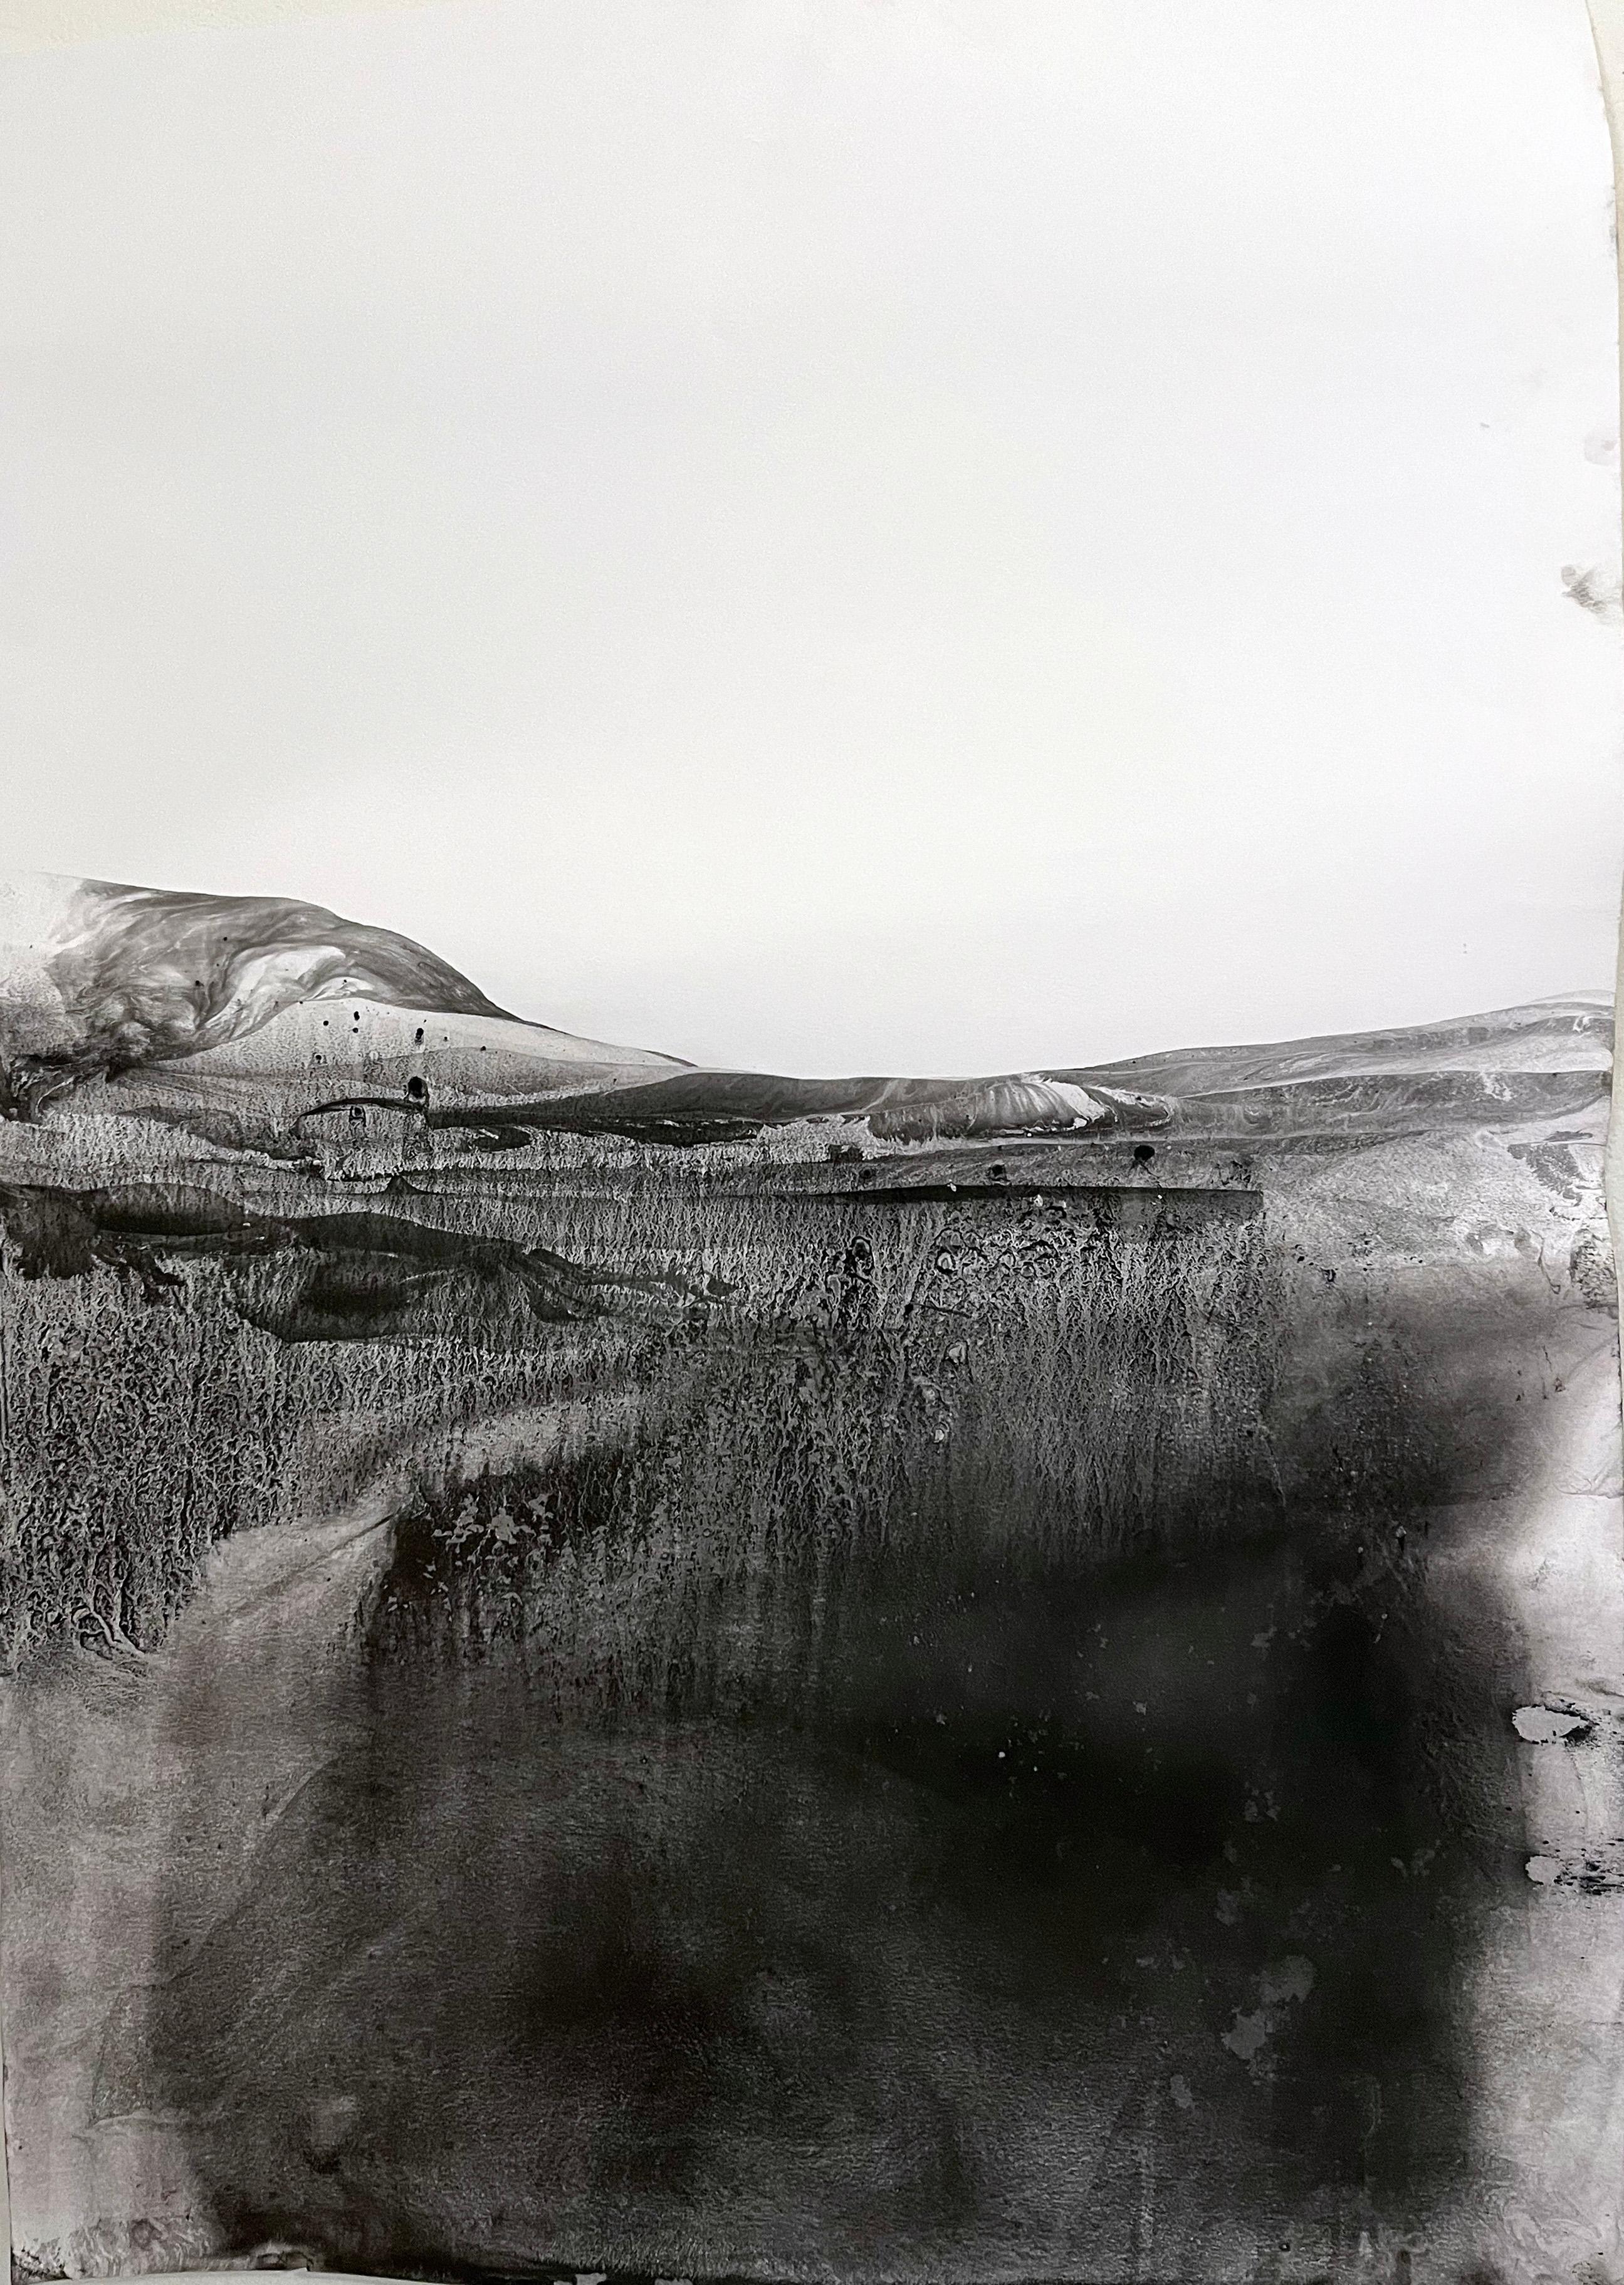 Marilina Marchica Landscape Painting - Landscape BW Abstract Drawing - Original Art Made in Italy